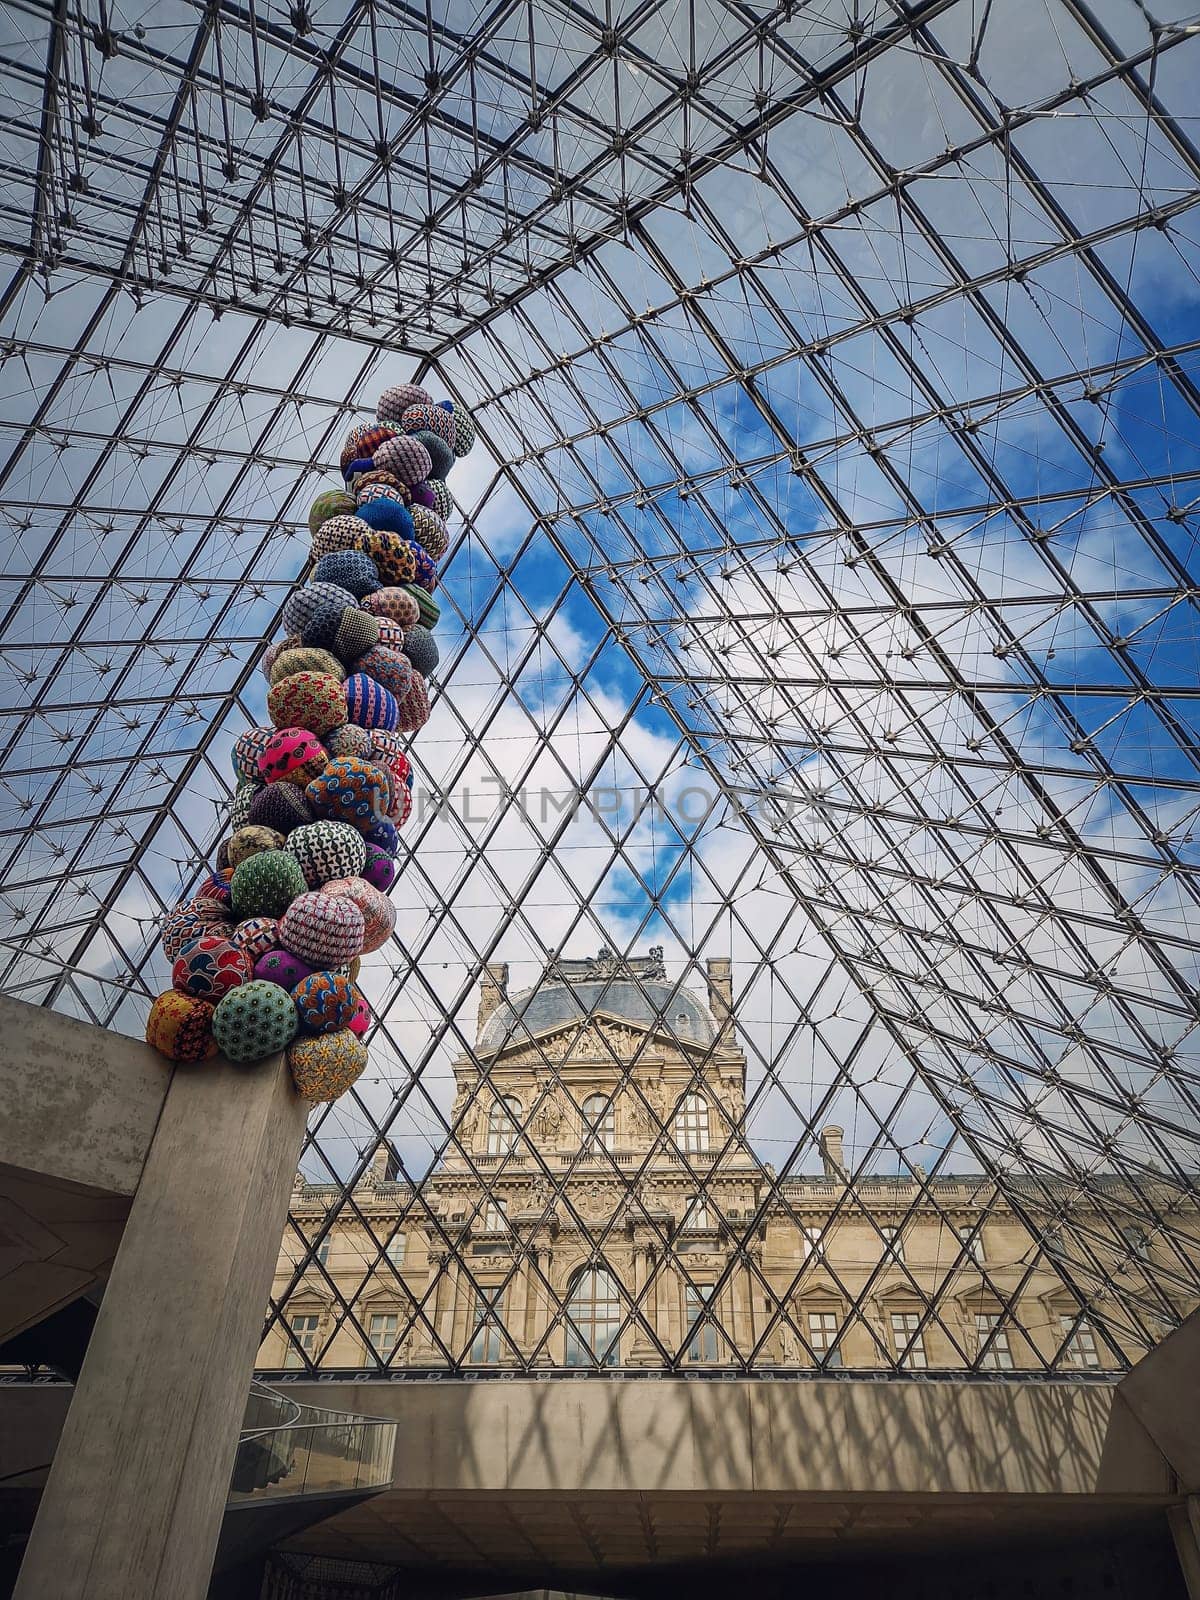 Underneath the Louvre glass pyramid, vertical background. Beautiful architecture details with an abstract mixture of classical and modern styles